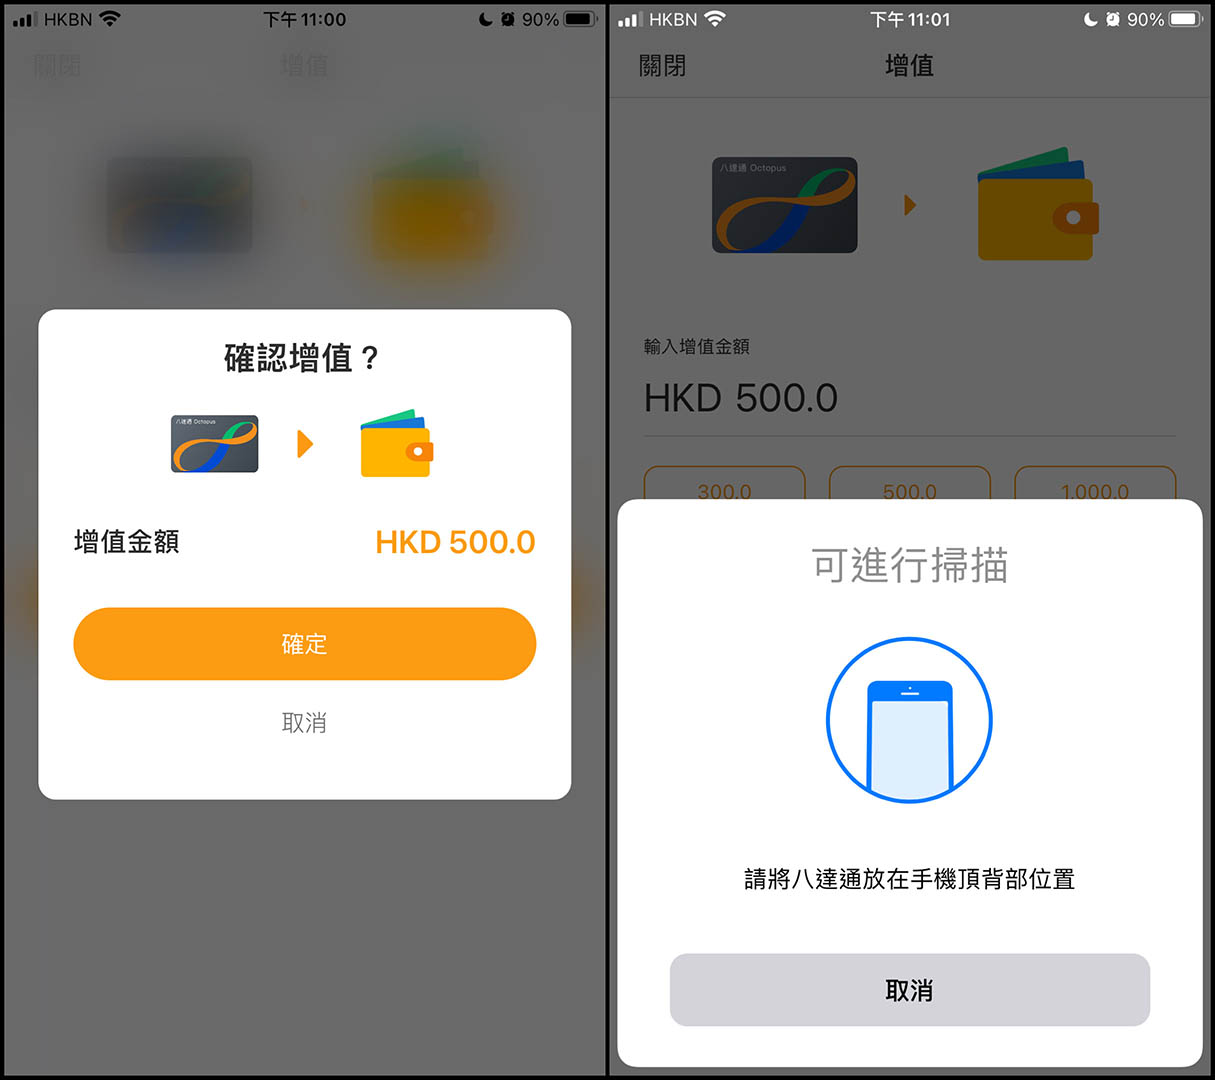 Add value to your Octopus Wallet via the Octopus Card